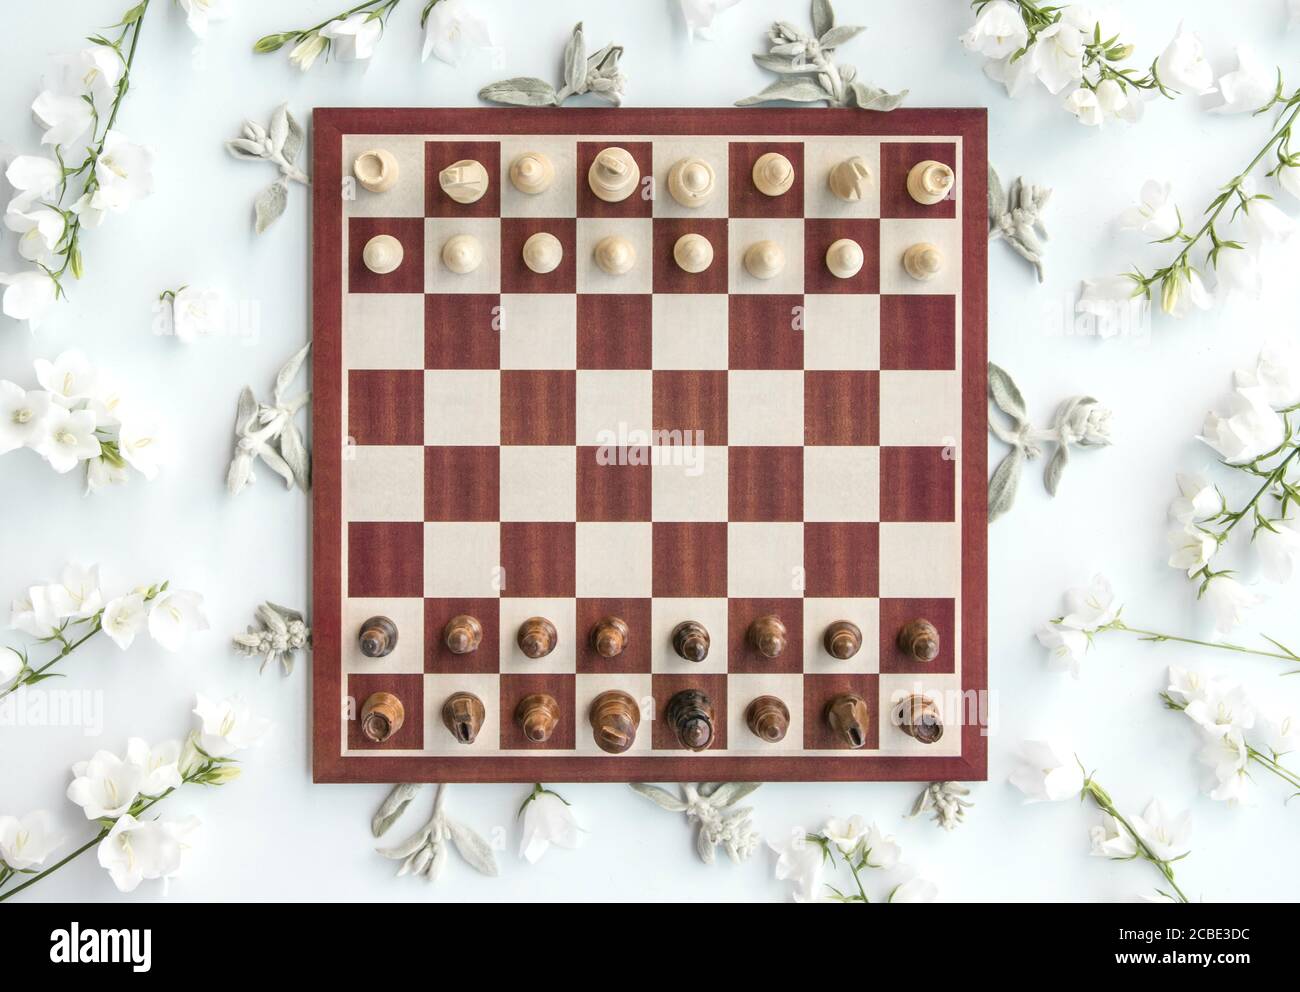 Chess pieces in starting position on a wooden oak Board Stock Photo - Alamy